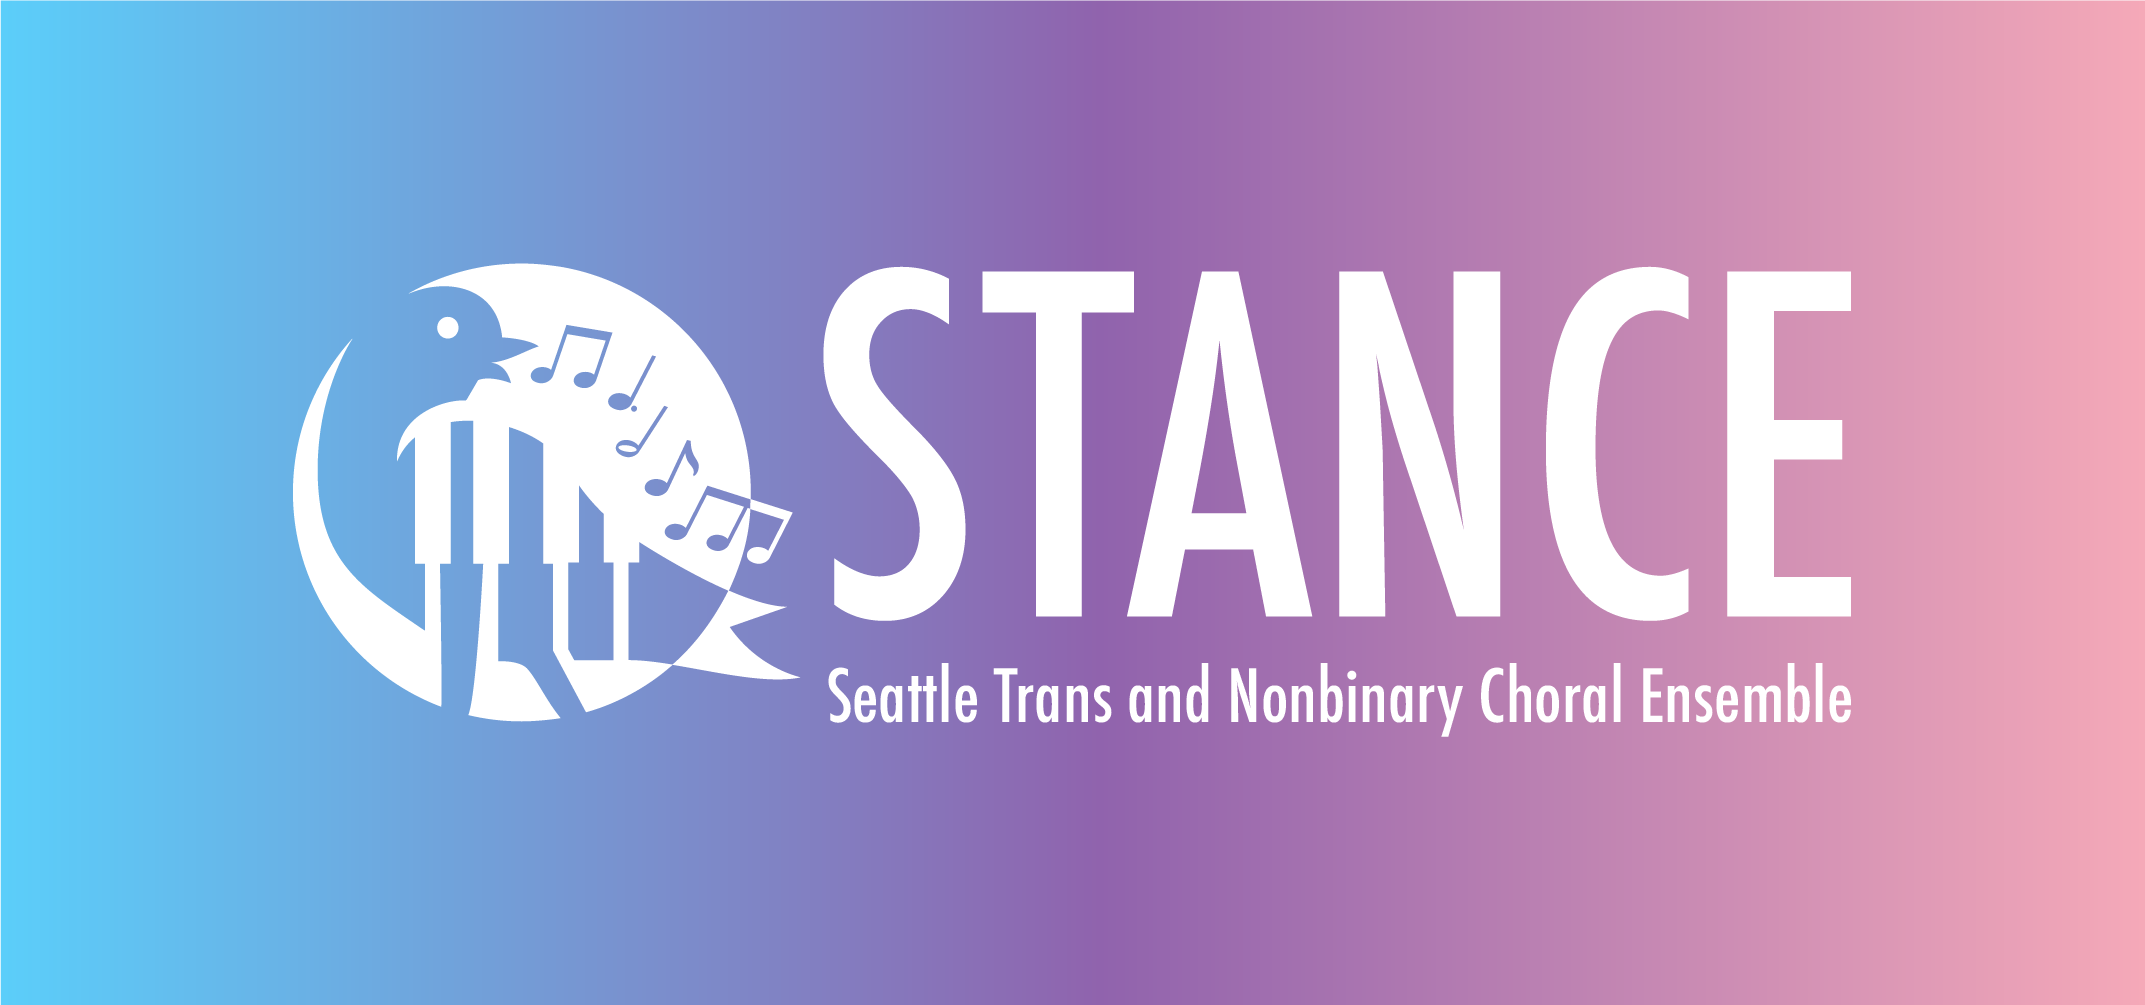 STANCE - Seattle Trans and Nonbinary Choral Ensemble